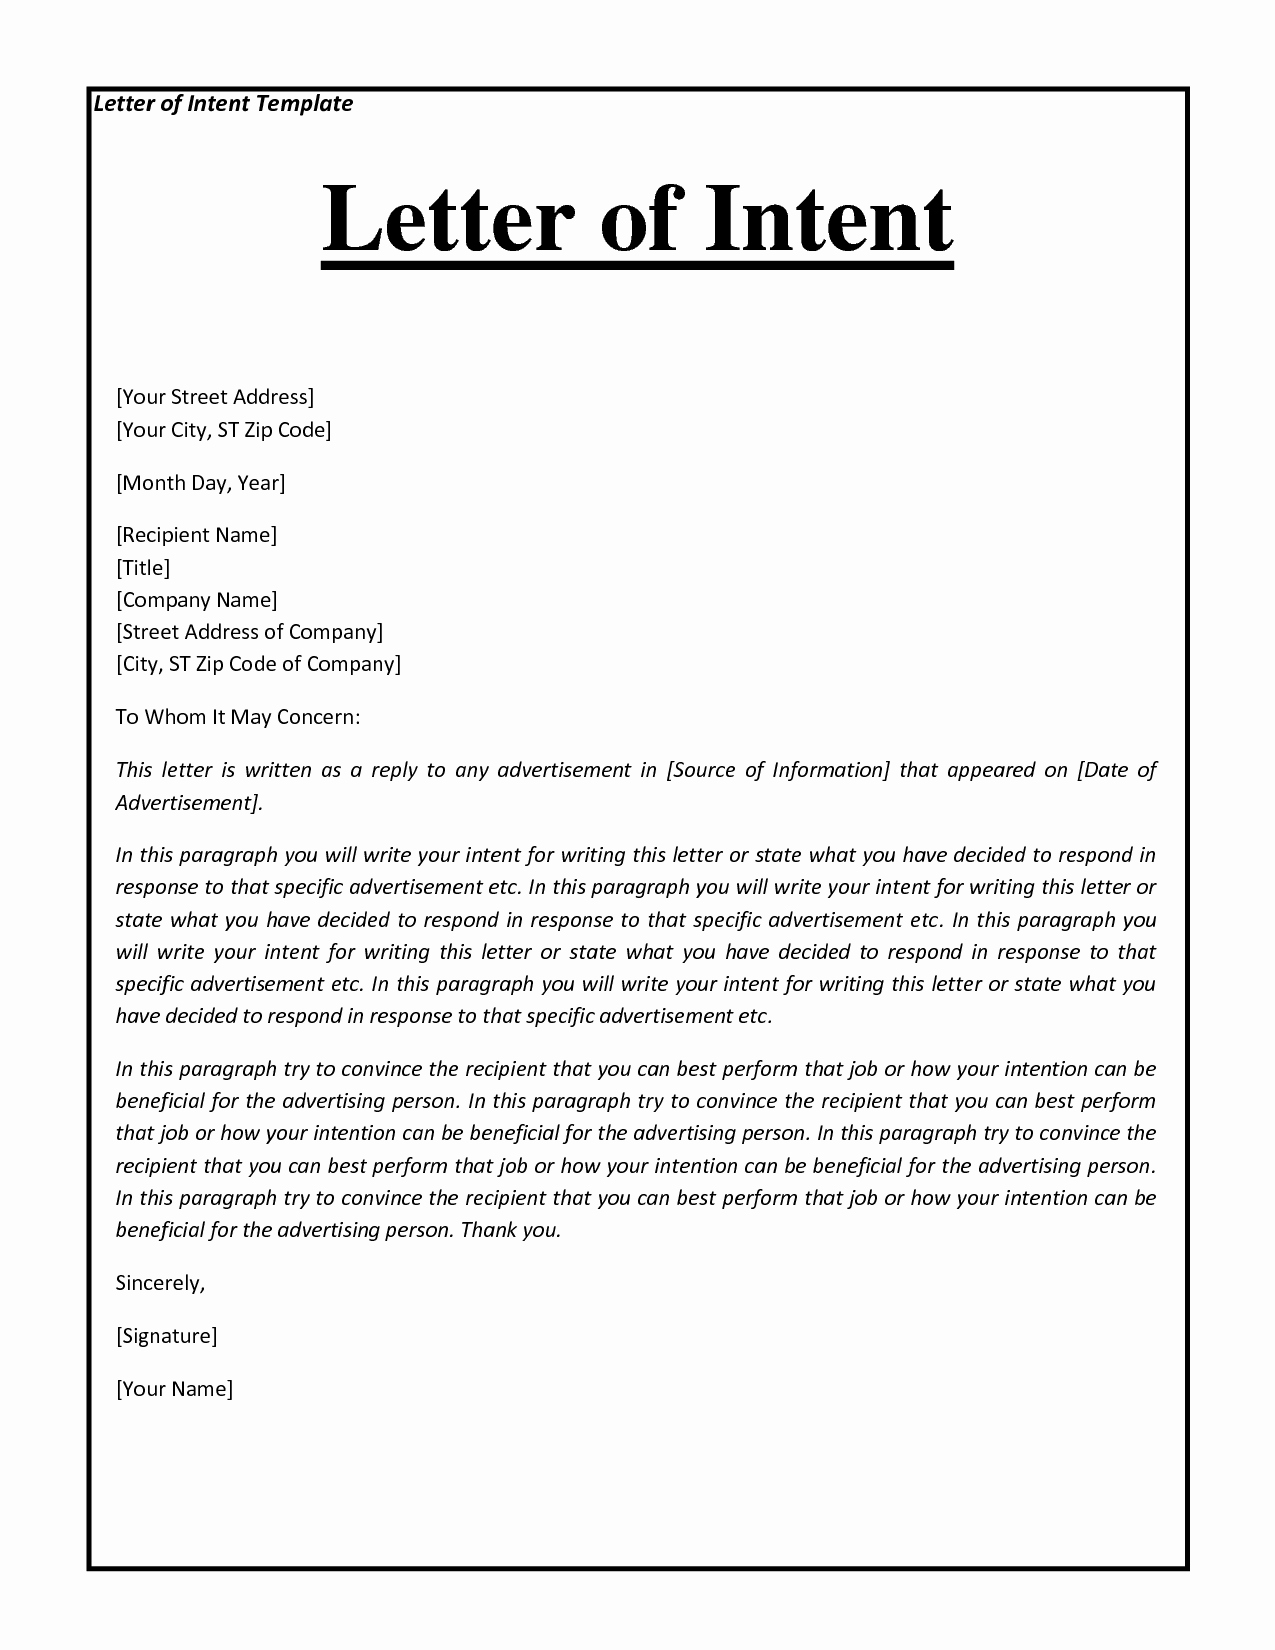 Sample Letters Of Intent Awesome Letter Intent Sample